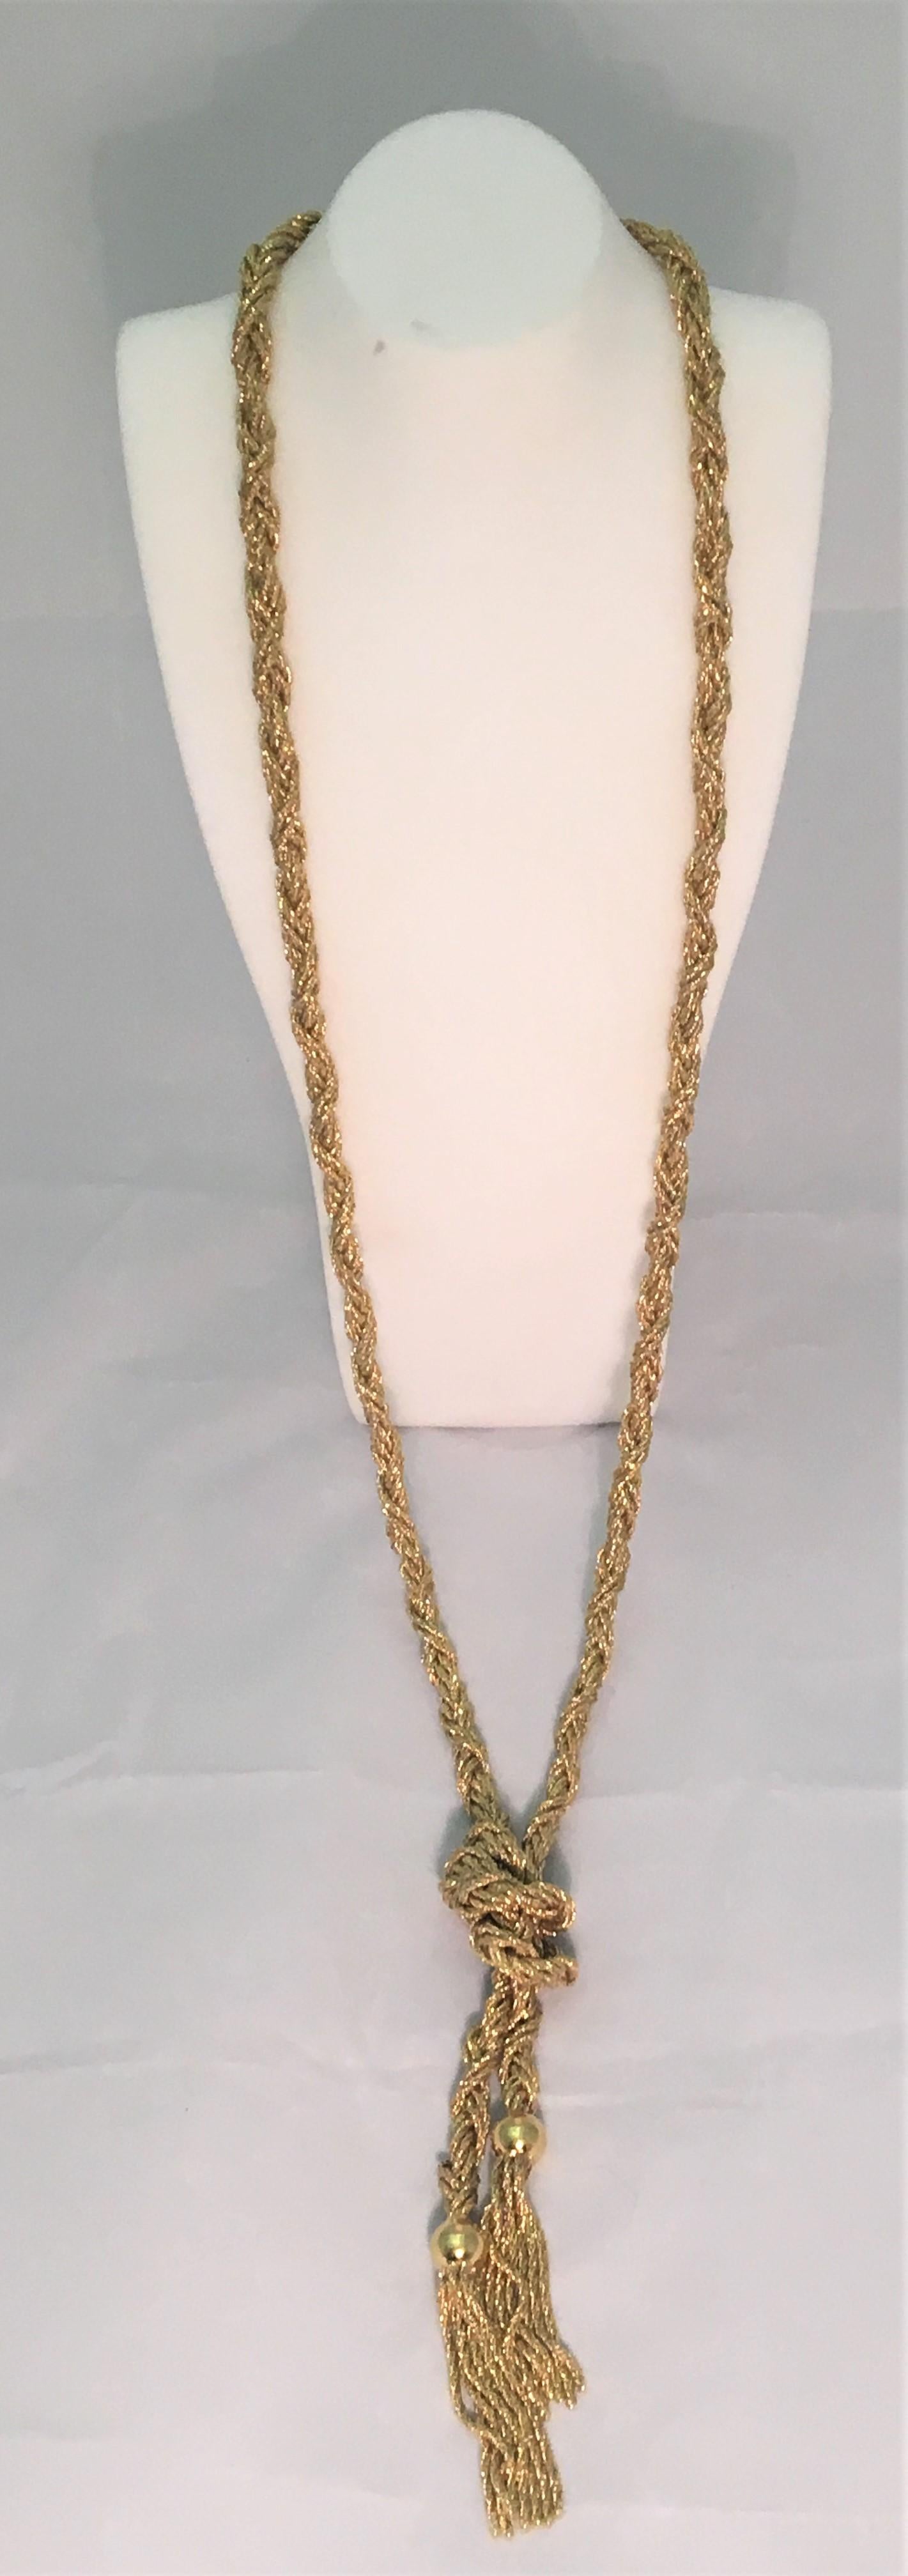 This beautiful necklace can be worn several ways!
18 karat yellow gold long braided necklace with tassels on each end
Can be worn knotted, long, wrapped/tied for a different style or even as a belt!
Approximately 5mm thick
Approximately 40 inches